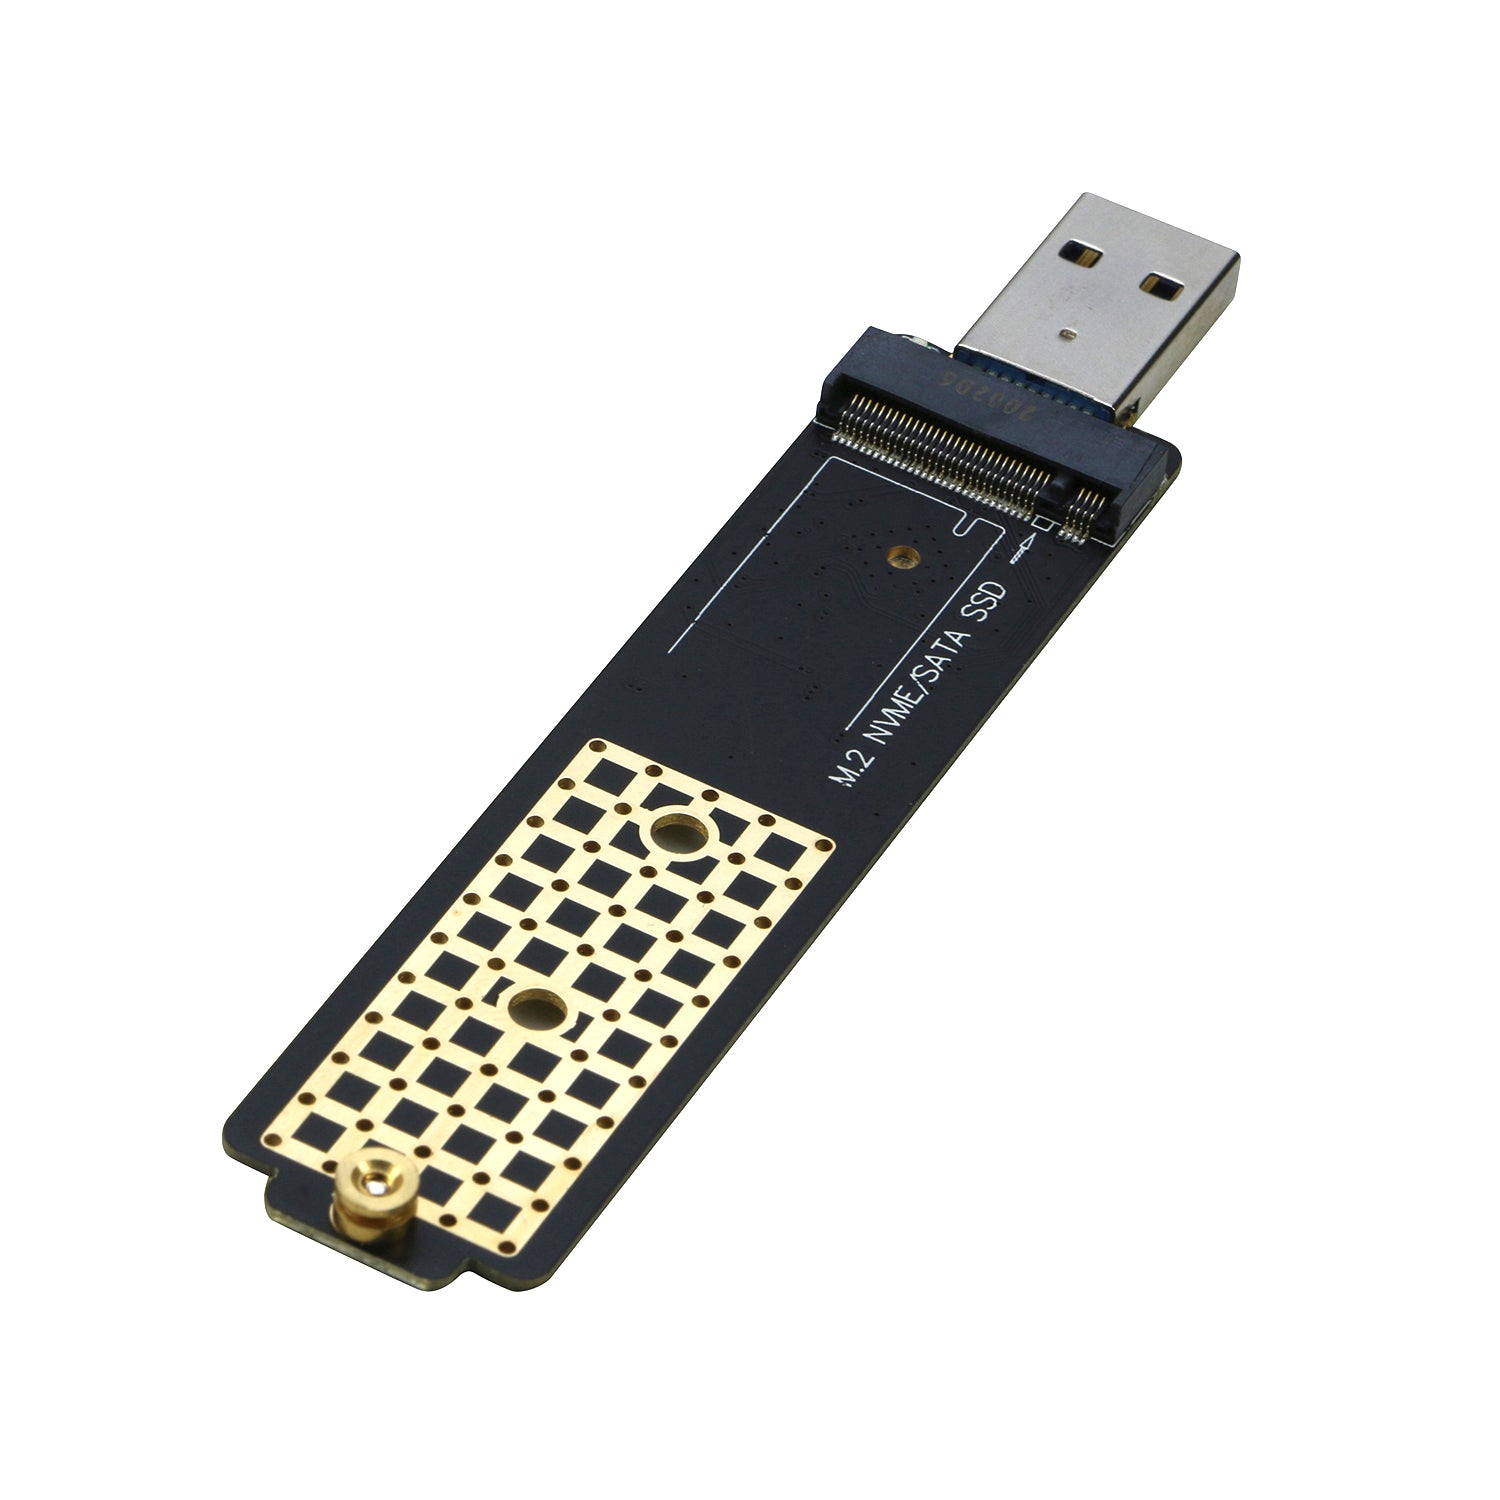 M.2 to USB Adapter, RIITOP NVMe & NGFF SSD to USB Reader Converter